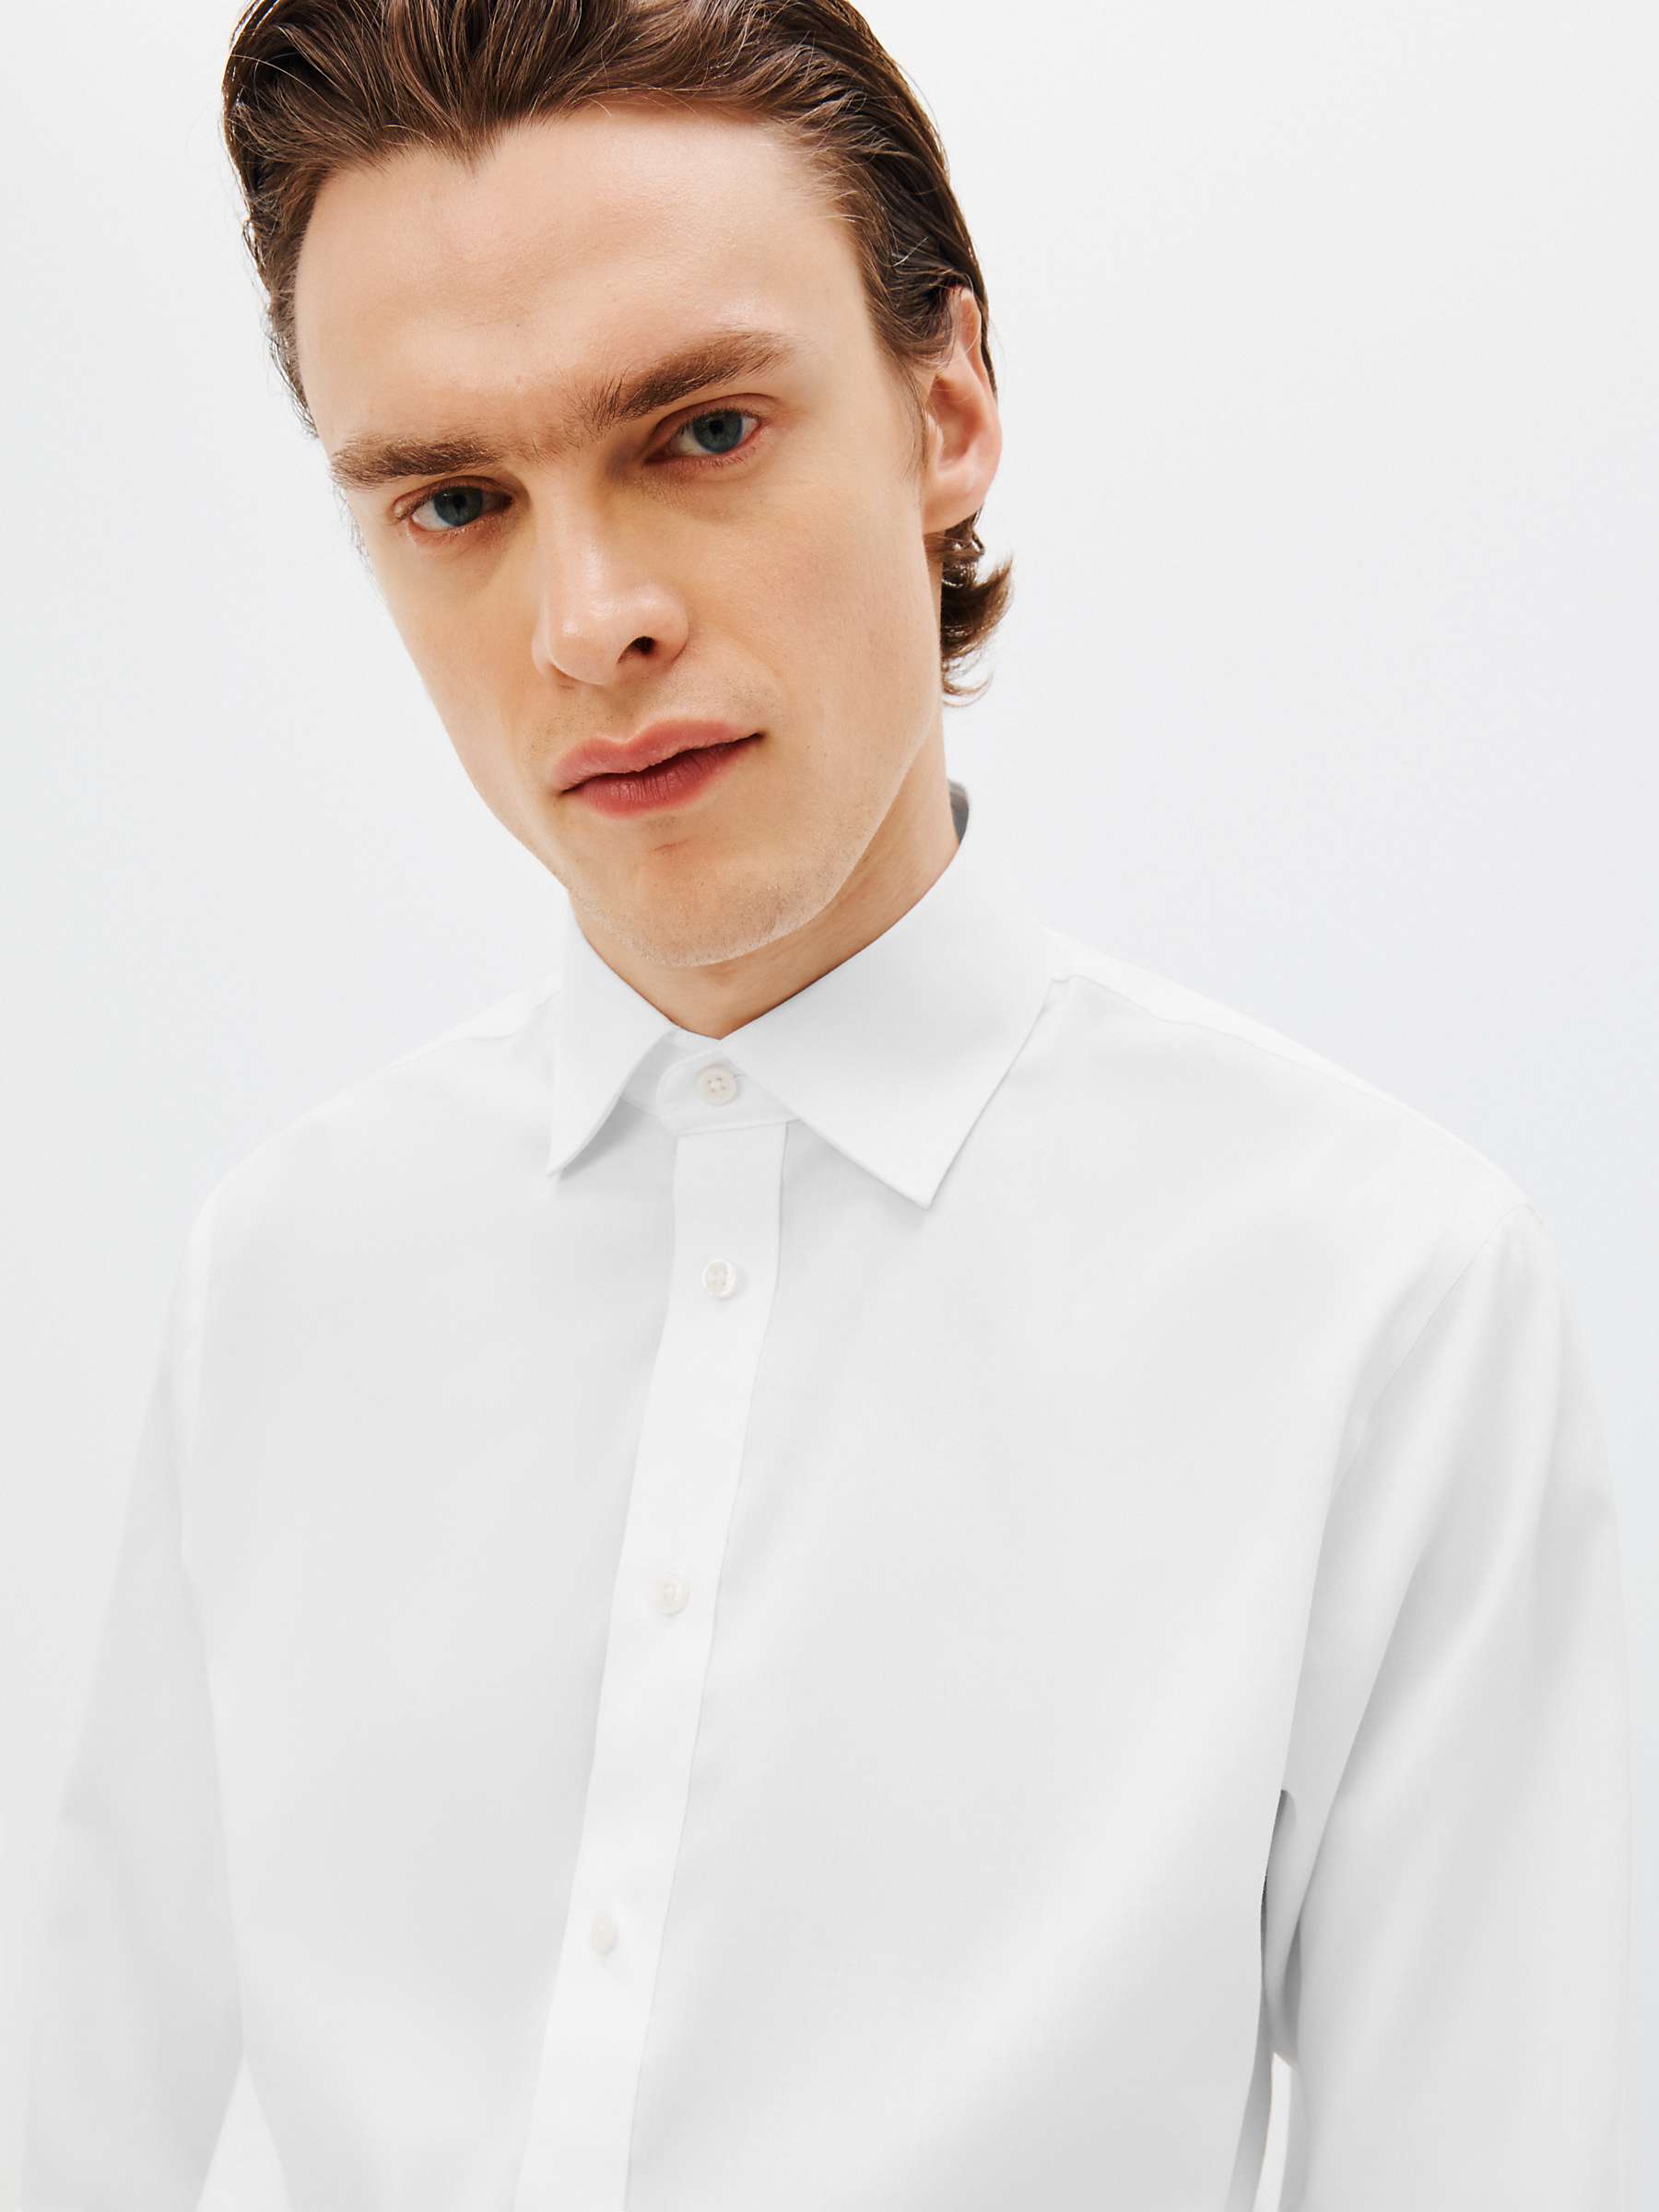 Buy John Lewis Non Iron Twill Double Cuff Tailored Fit Shirt Online at johnlewis.com